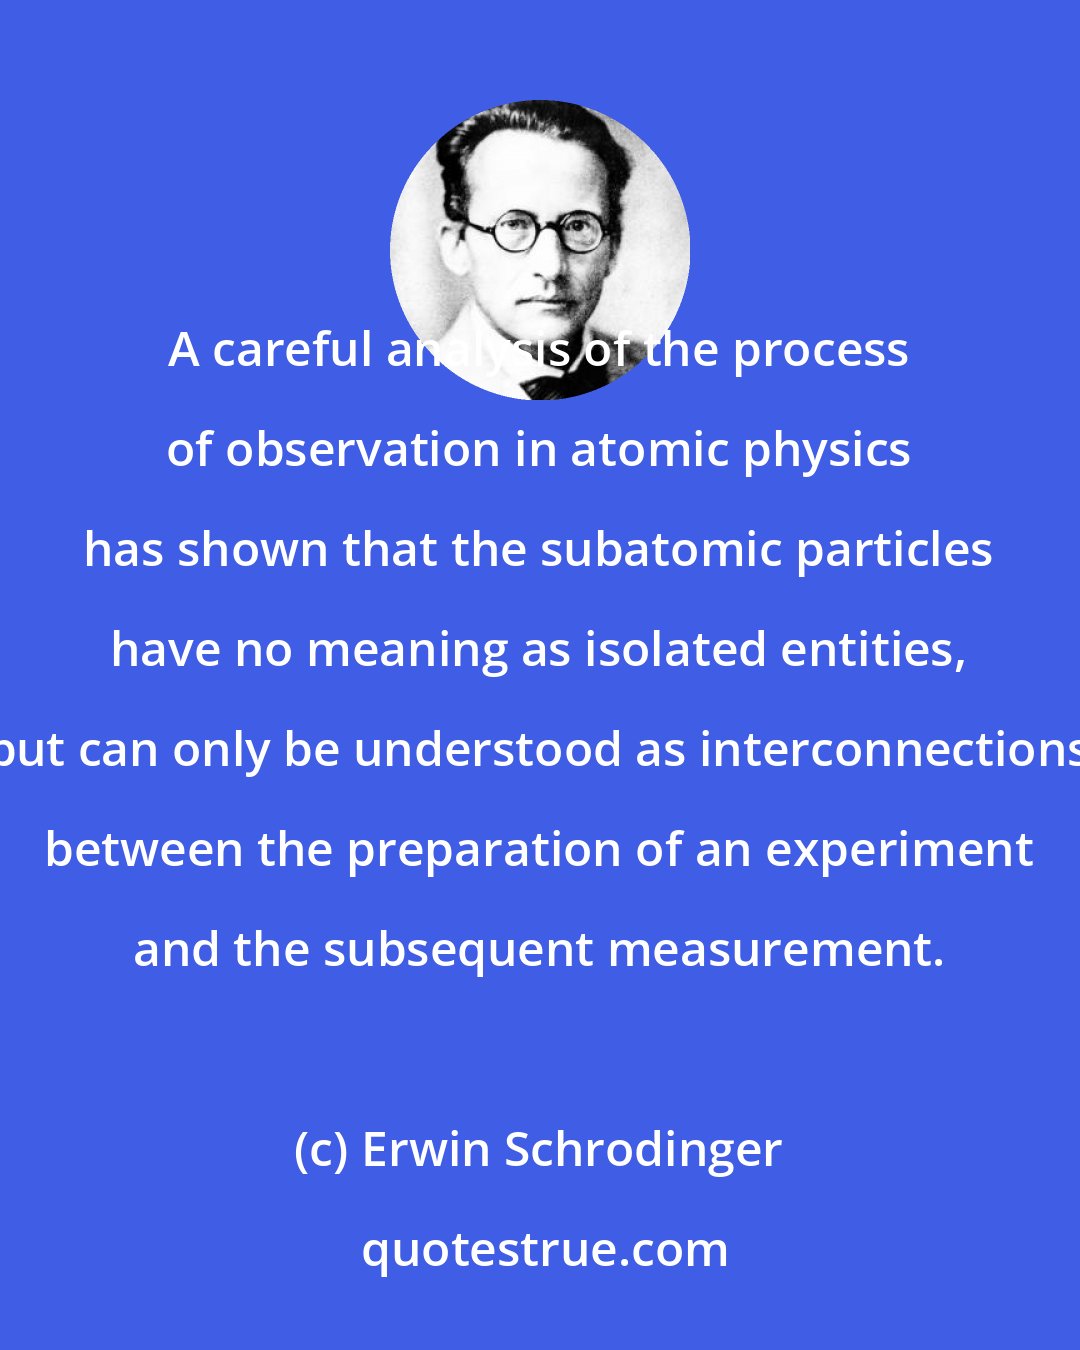 Erwin Schrodinger: A careful analysis of the process of observation in atomic physics has shown that the subatomic particles have no meaning as isolated entities, but can only be understood as interconnections between the preparation of an experiment and the subsequent measurement.